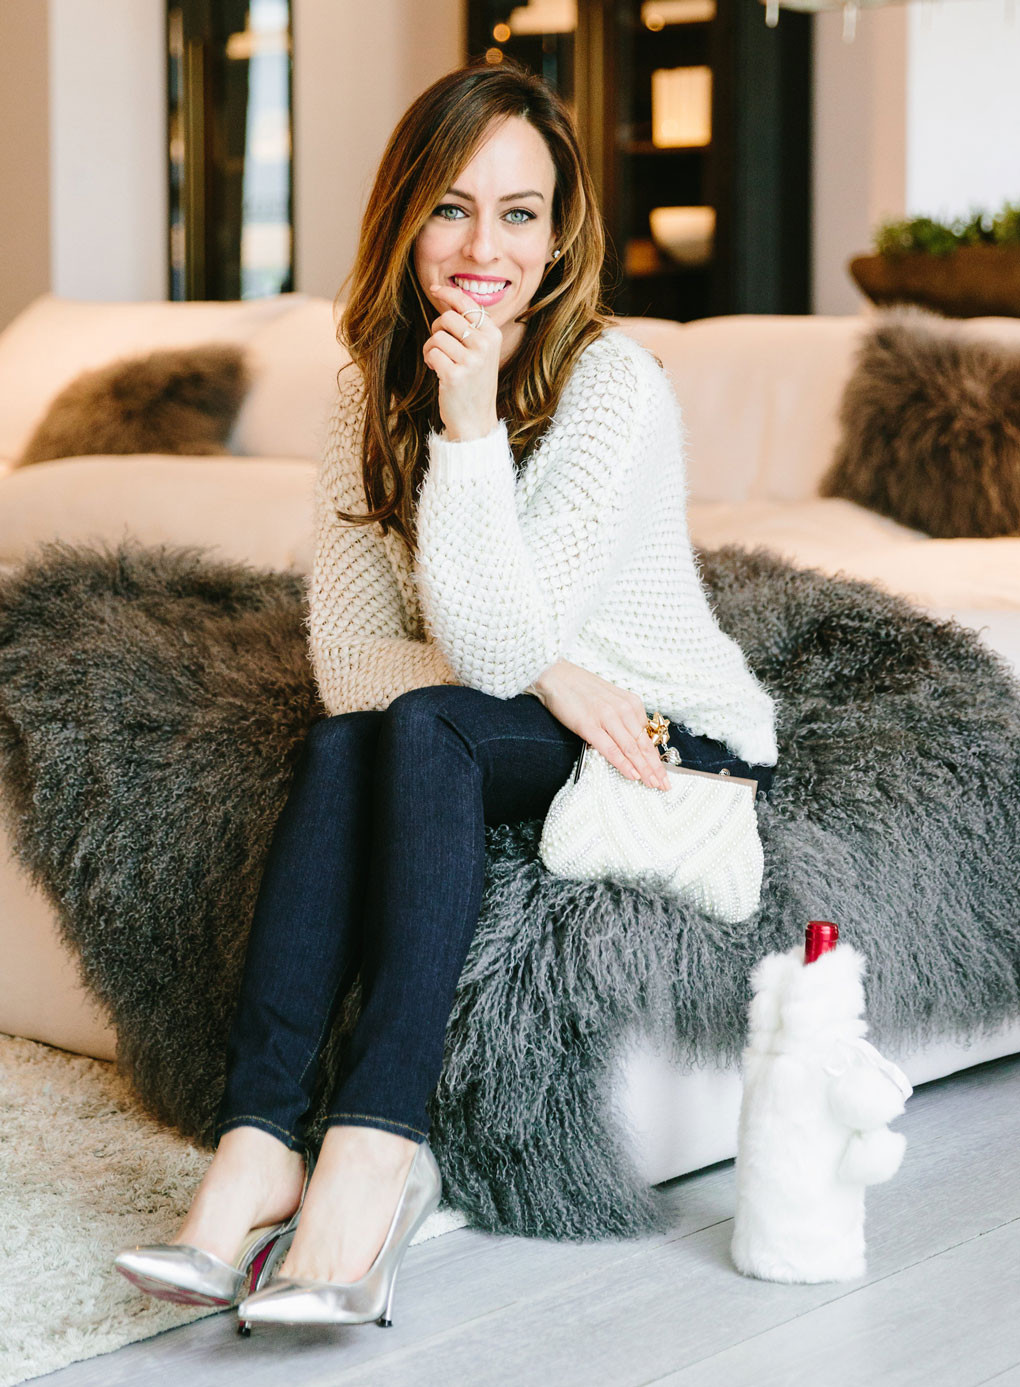 Casual Holiday Party Outfit Ideas
 Cozy Holiday Party Outfits